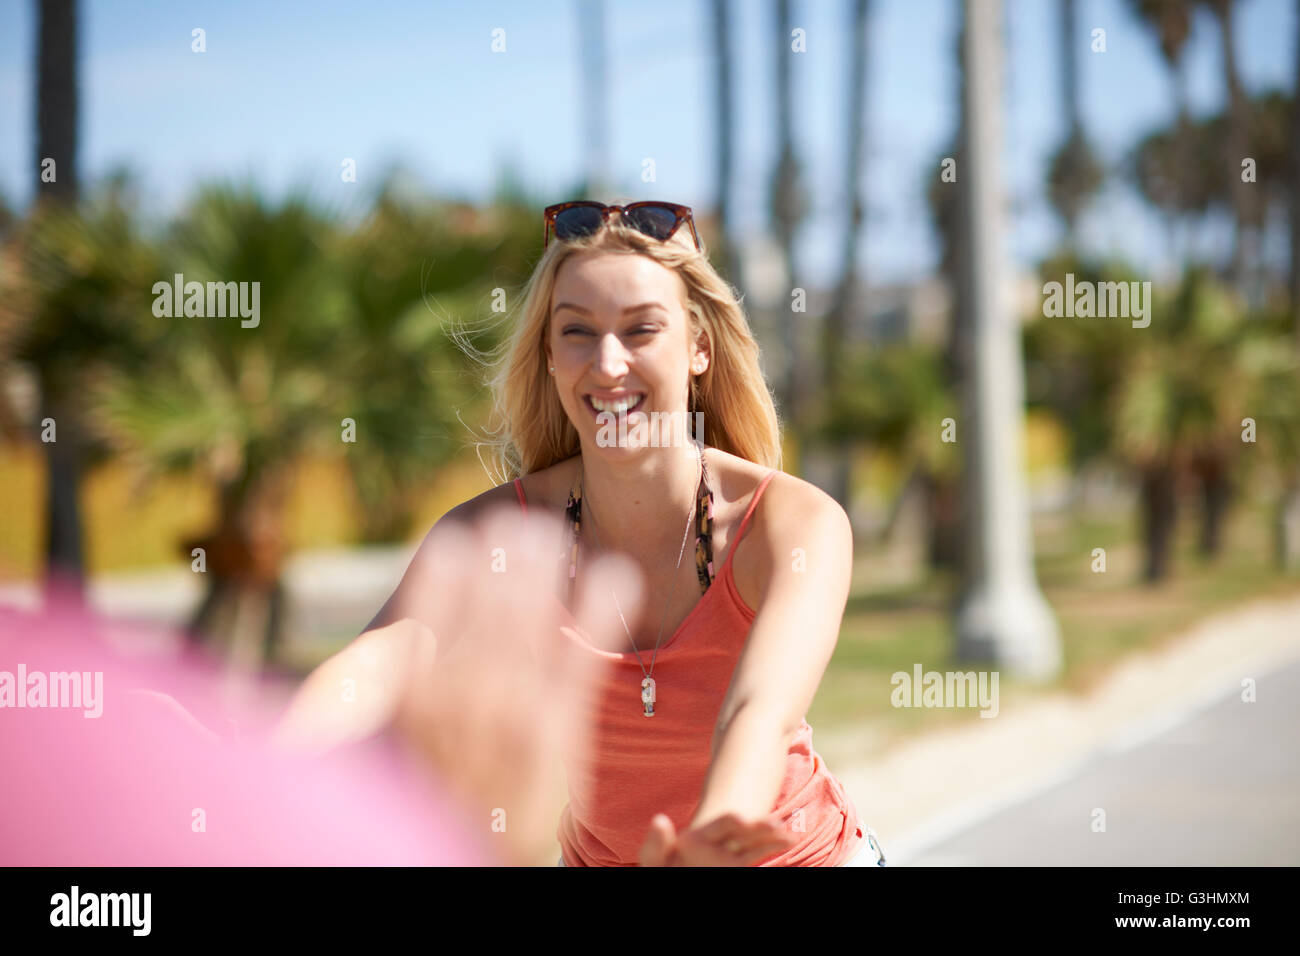 Young woman, outdoors, smiling Stock Photo